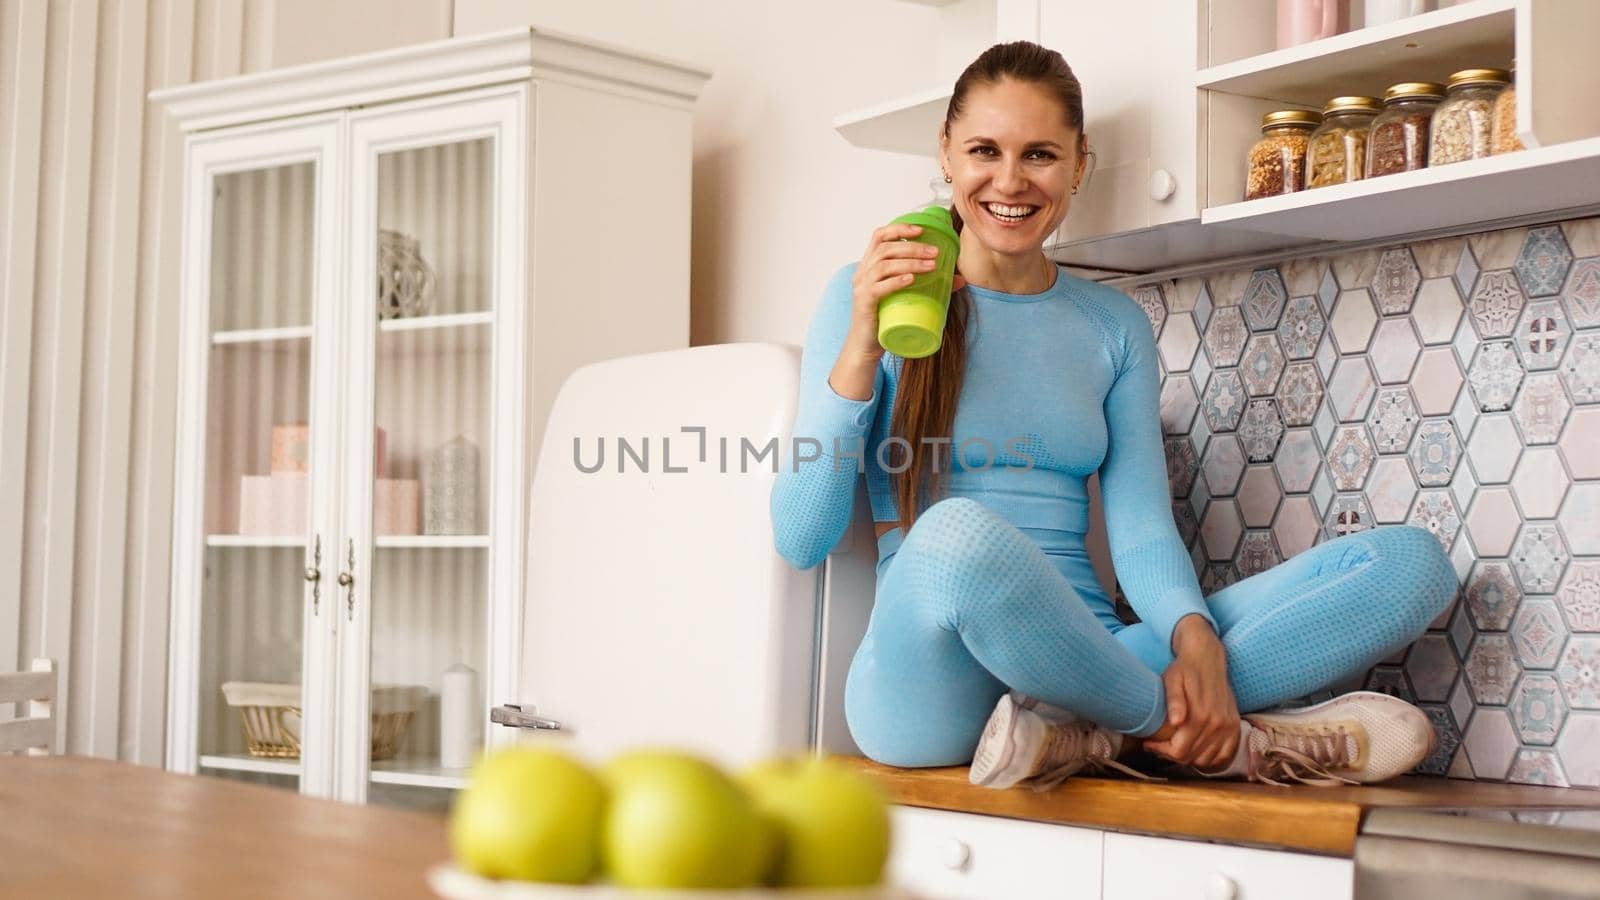 A woman sits on the countertop in the kitchen with a green bottle for sports nutrition or water. Healthy lifestyle concept.